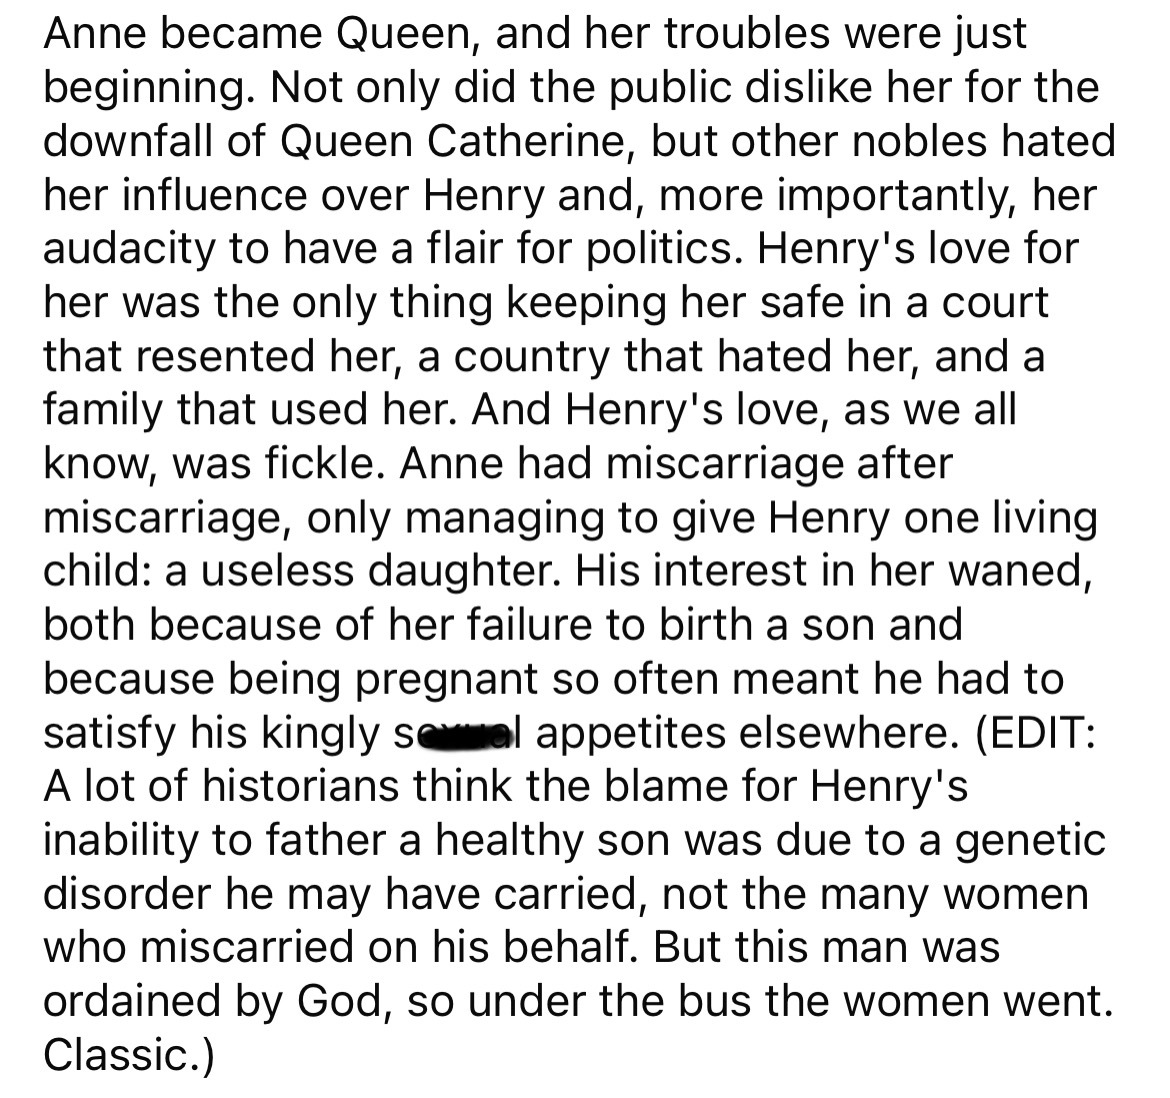 four paragraph story - Anne became Queen, and her troubles were just beginning. Not only did the public dis her for the downfall of Queen Catherine, but other nobles hated her influence over Henry and, more importantly, her audacity to have a flair for po